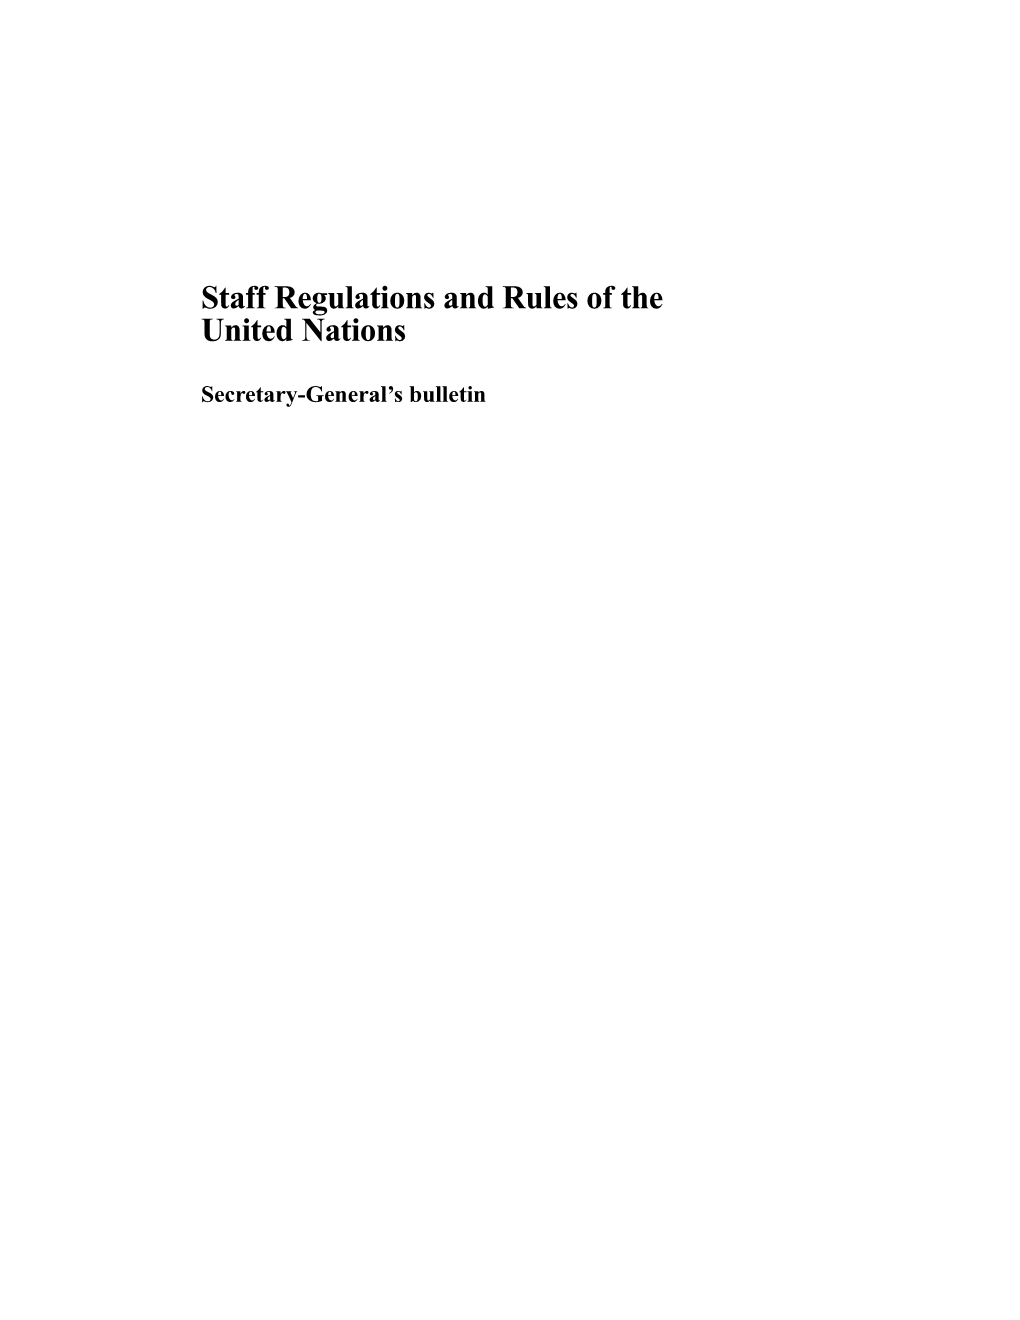 Staff Regulations and Rules of the Unitednations